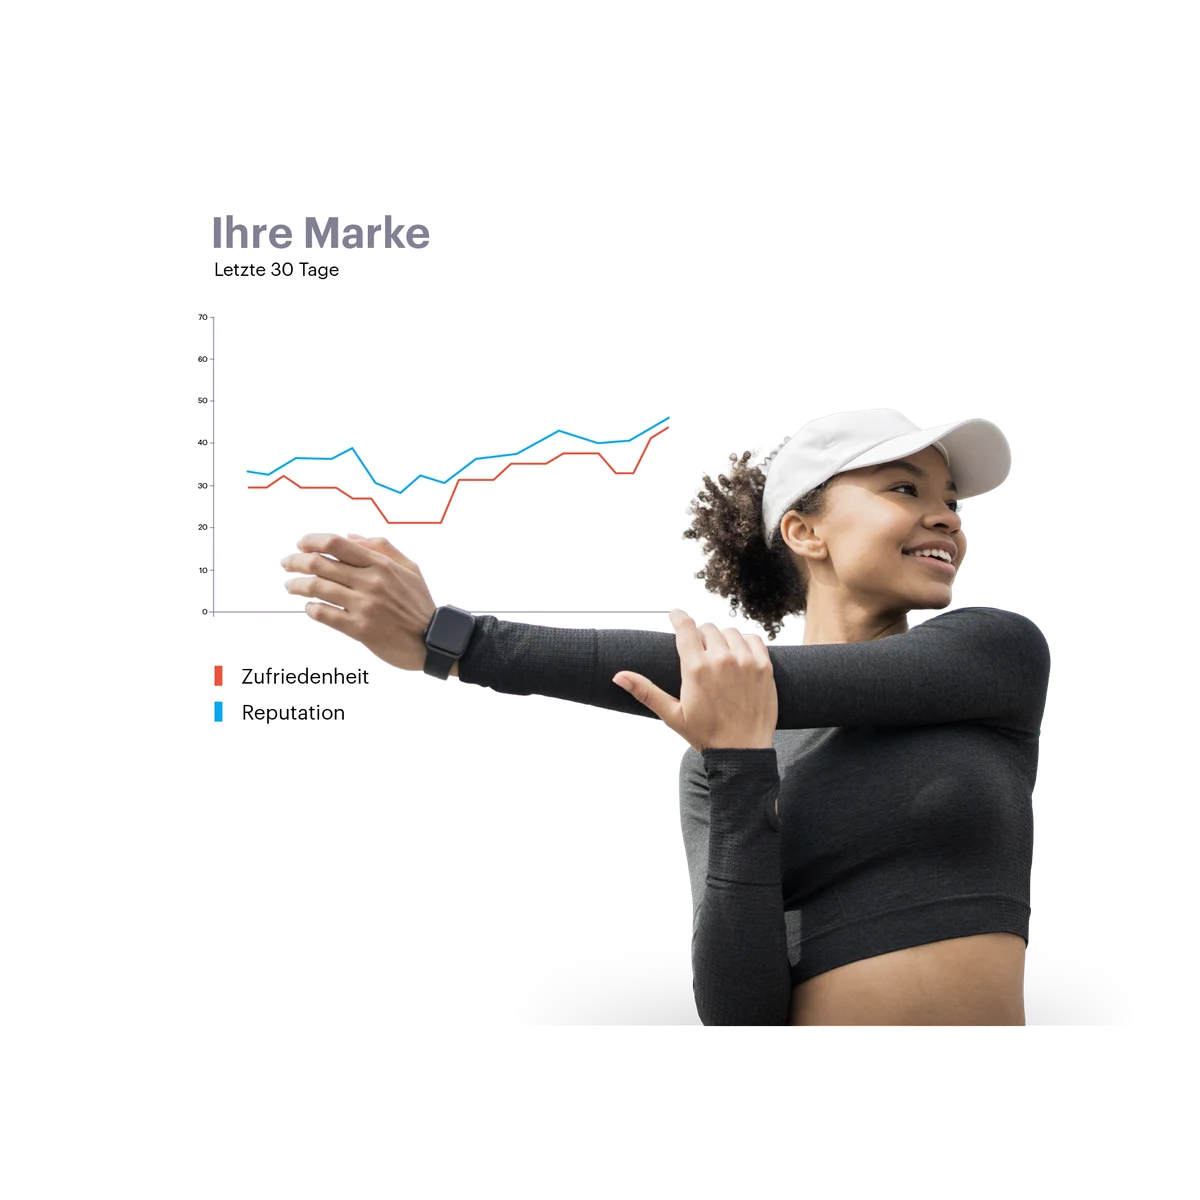 woman in sports equipment and brand data behind